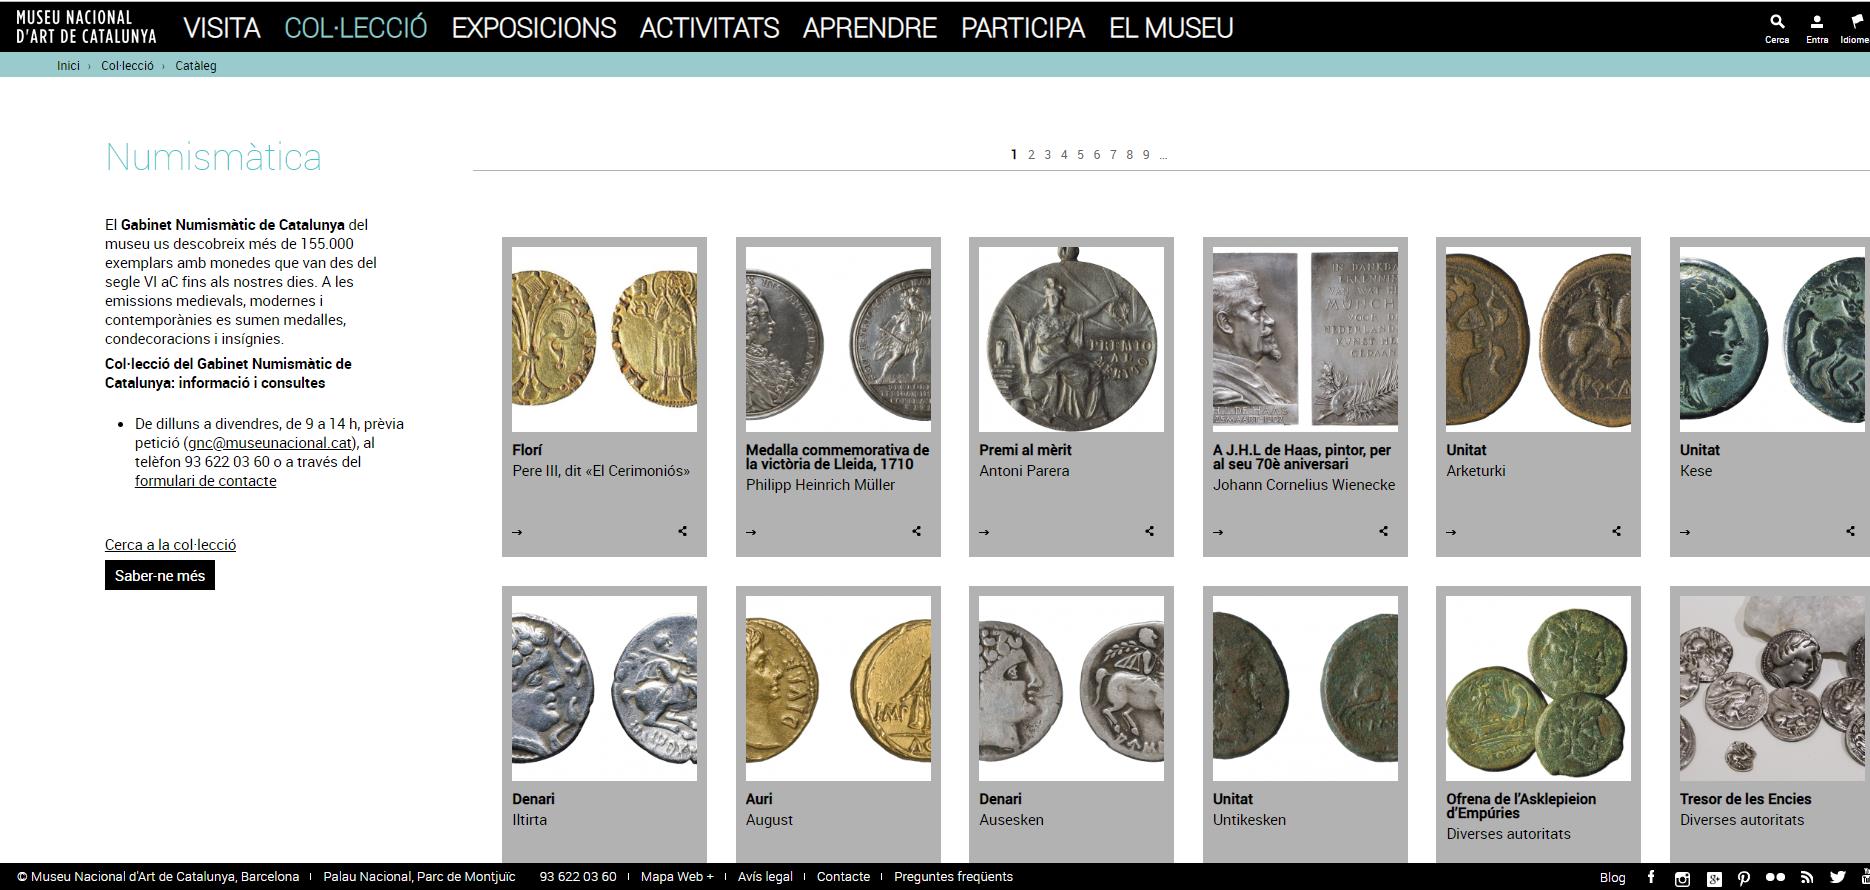 Online Catalog of the of the Numismatic Cabinet of Catalonia